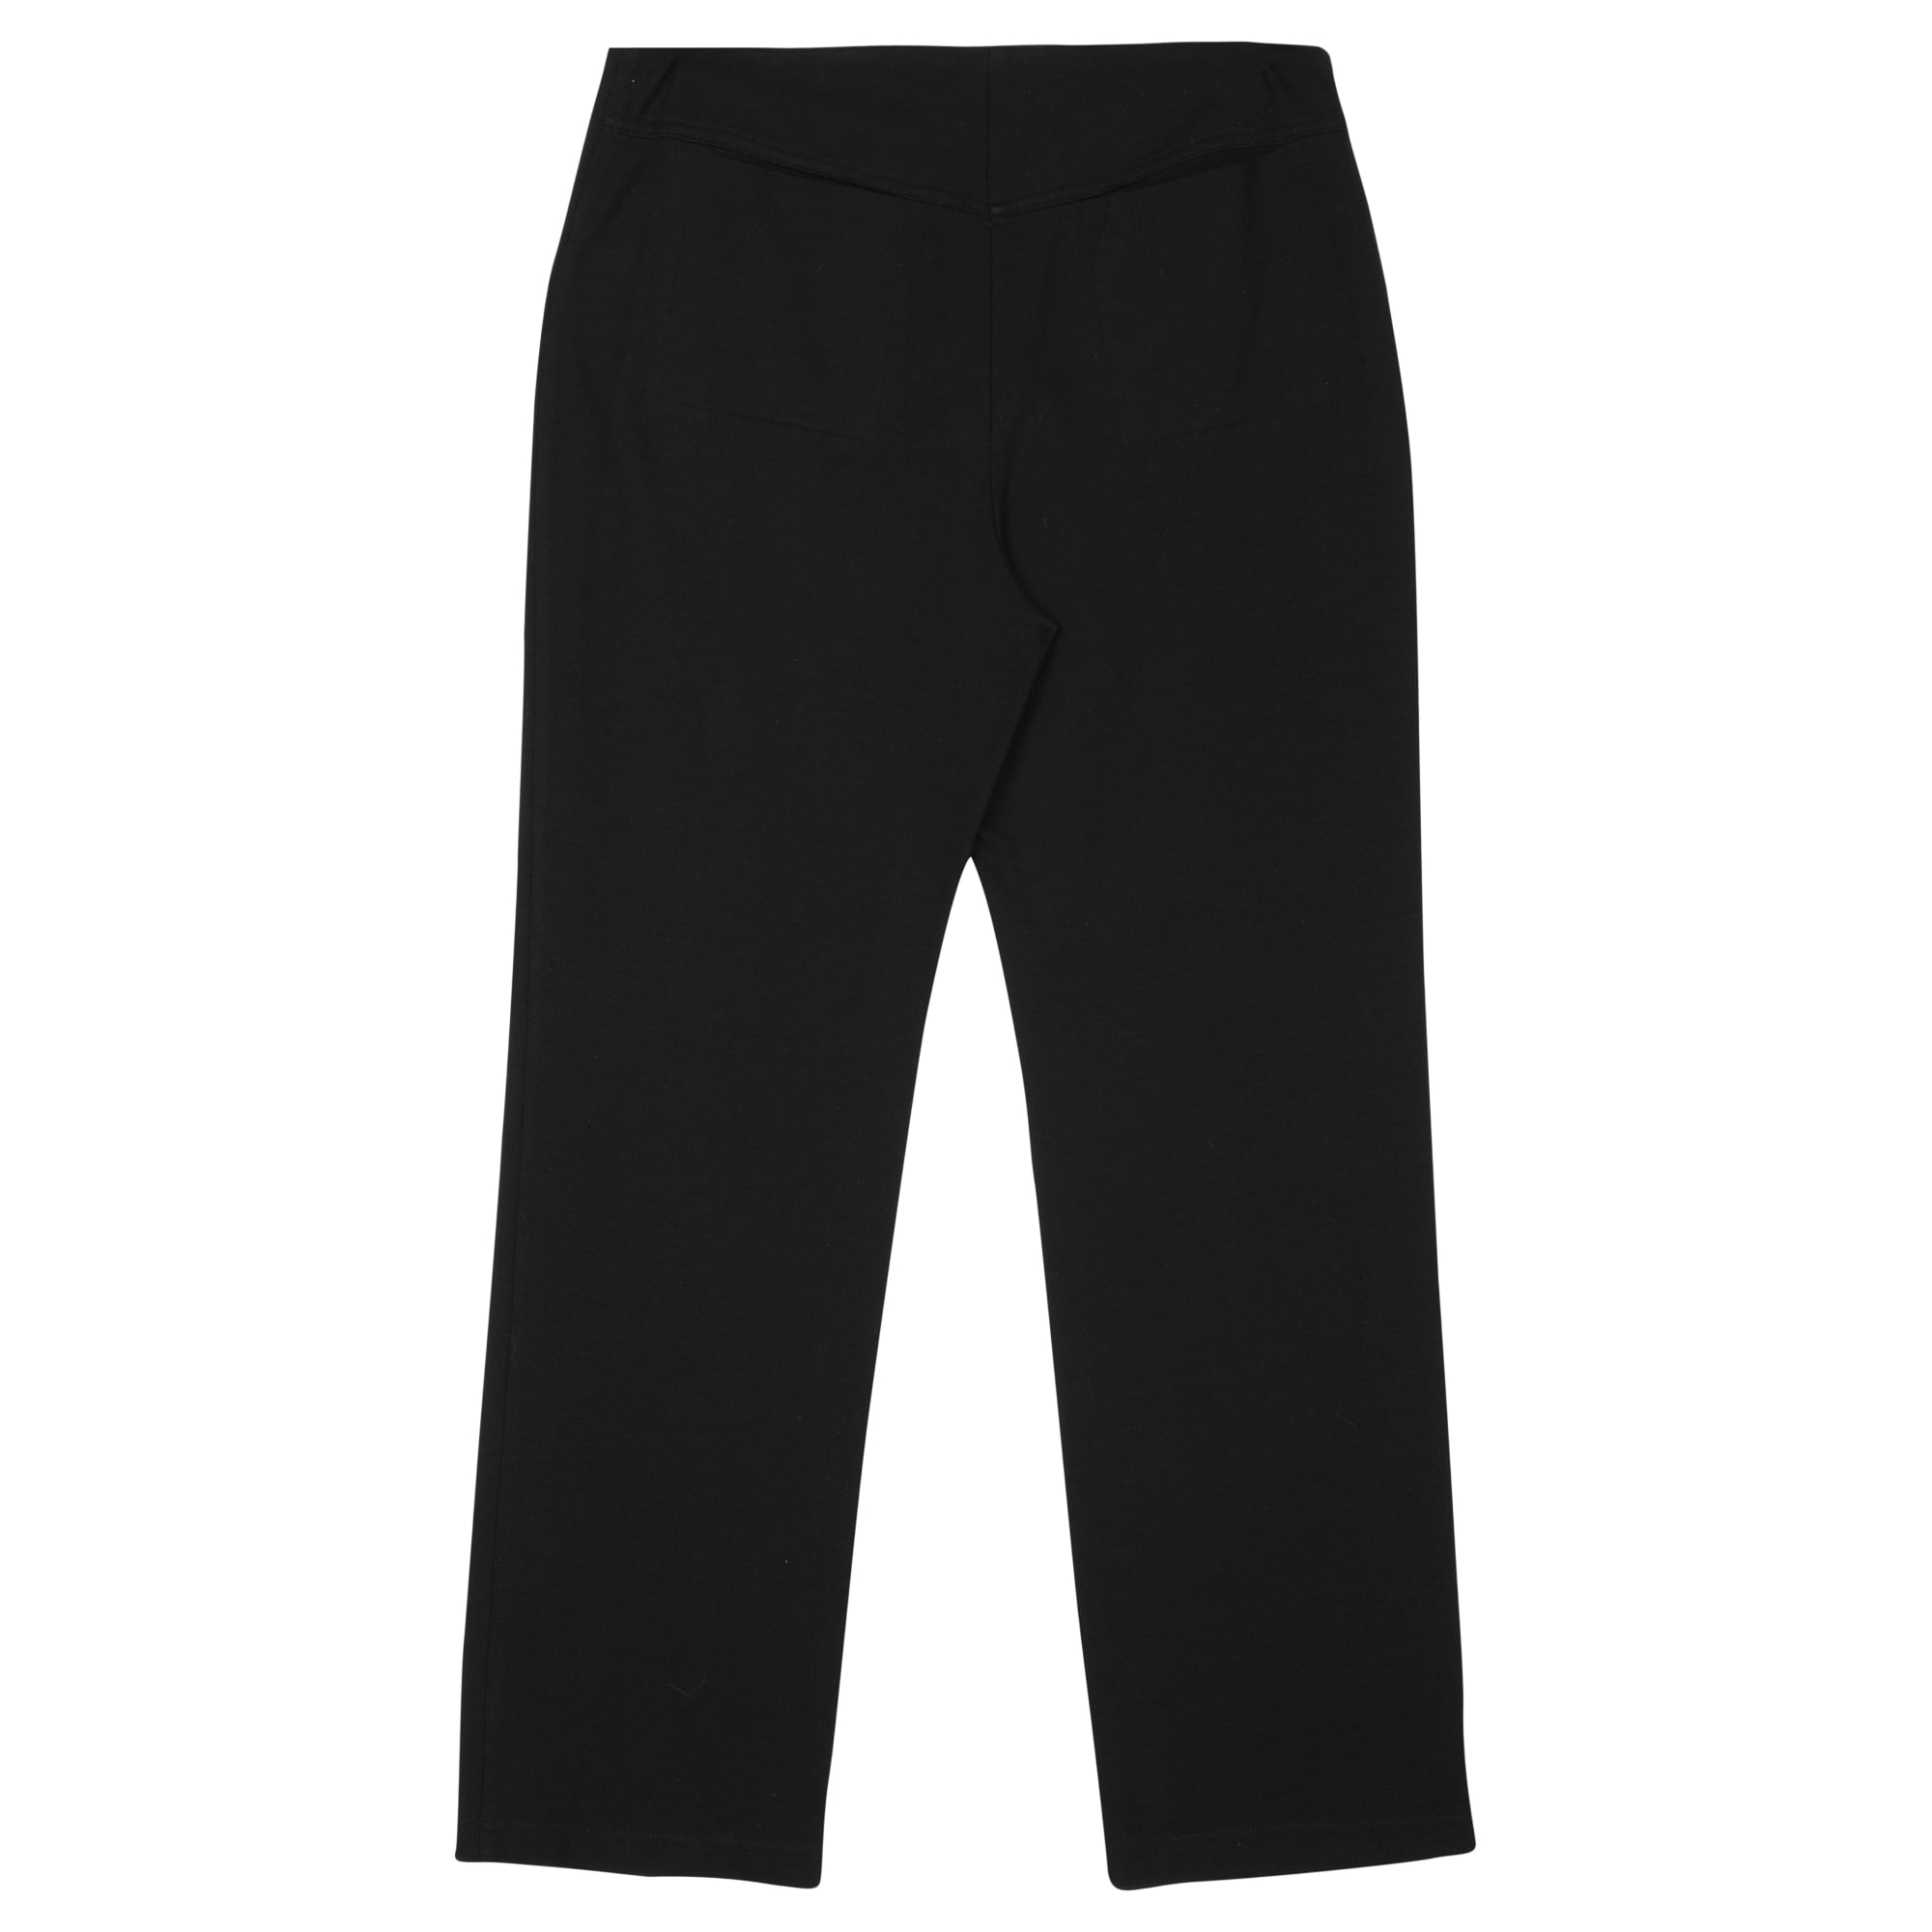 Used Viscose Stretch Ponte Pant Black | EILEEN FISHER RENEW